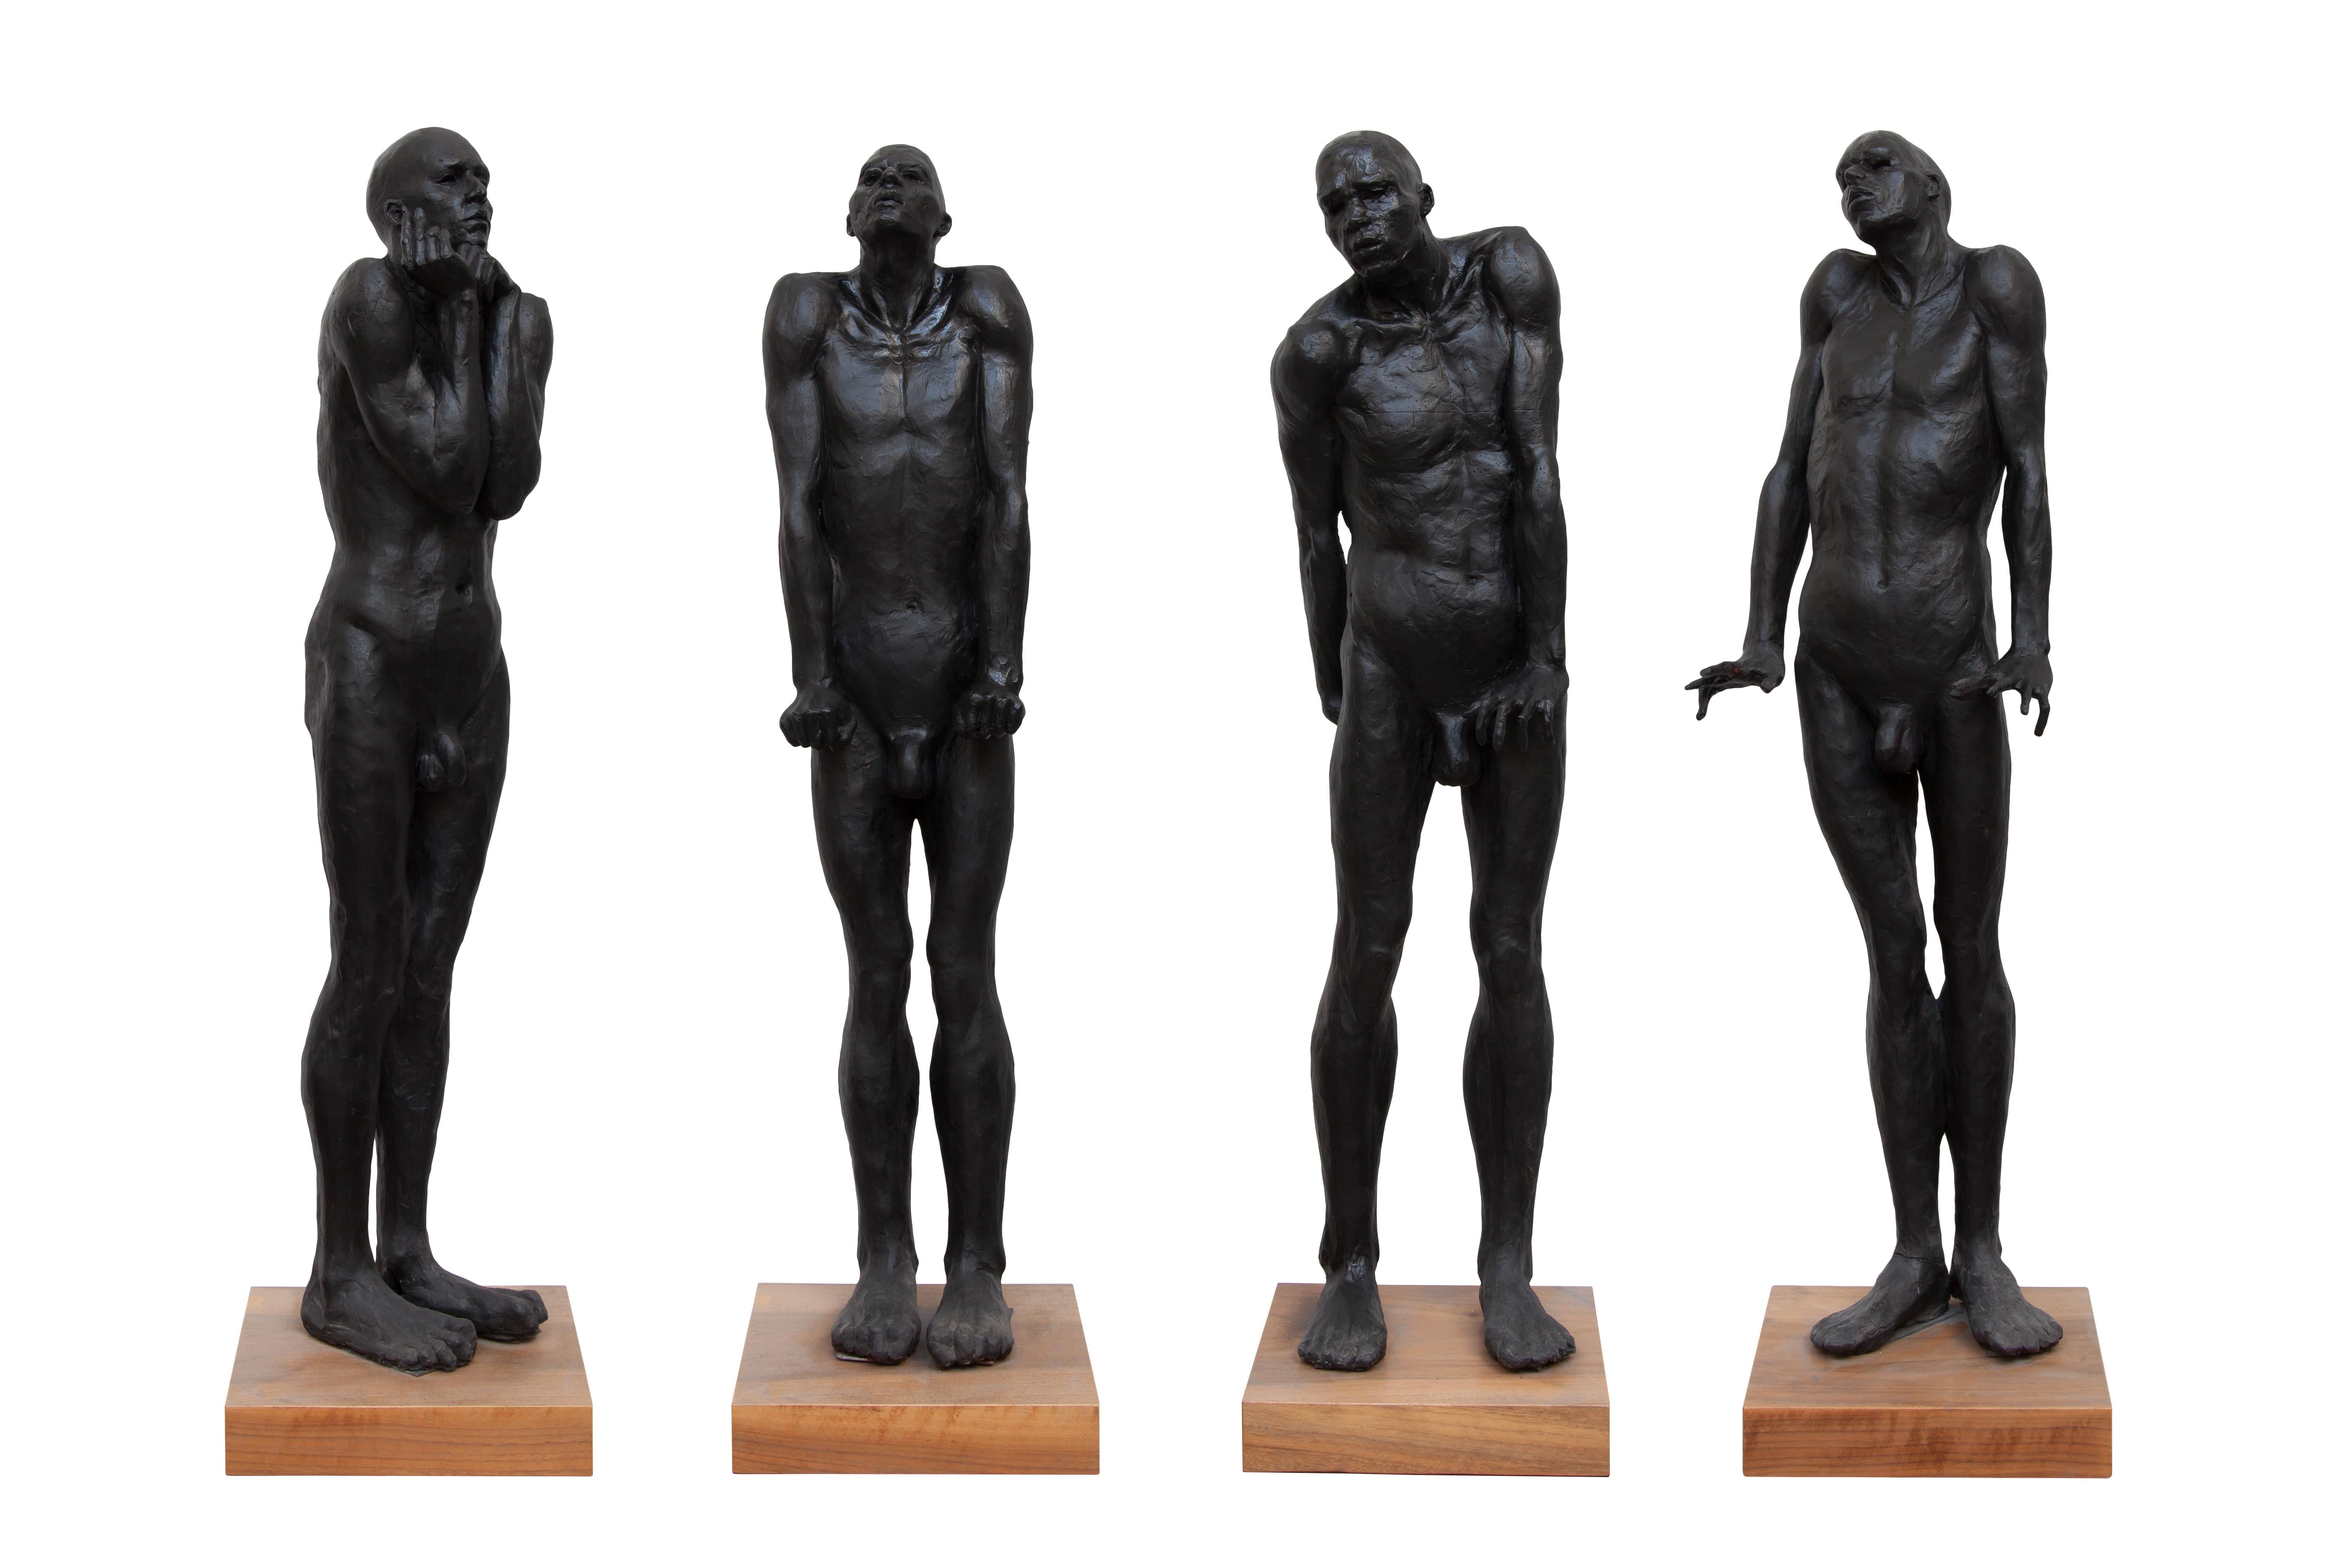 Seven Million and Counting (Sculpture 5) - Contemporary bronze sculpture  - Brown Figurative Sculpture by Guy Haddon Grant